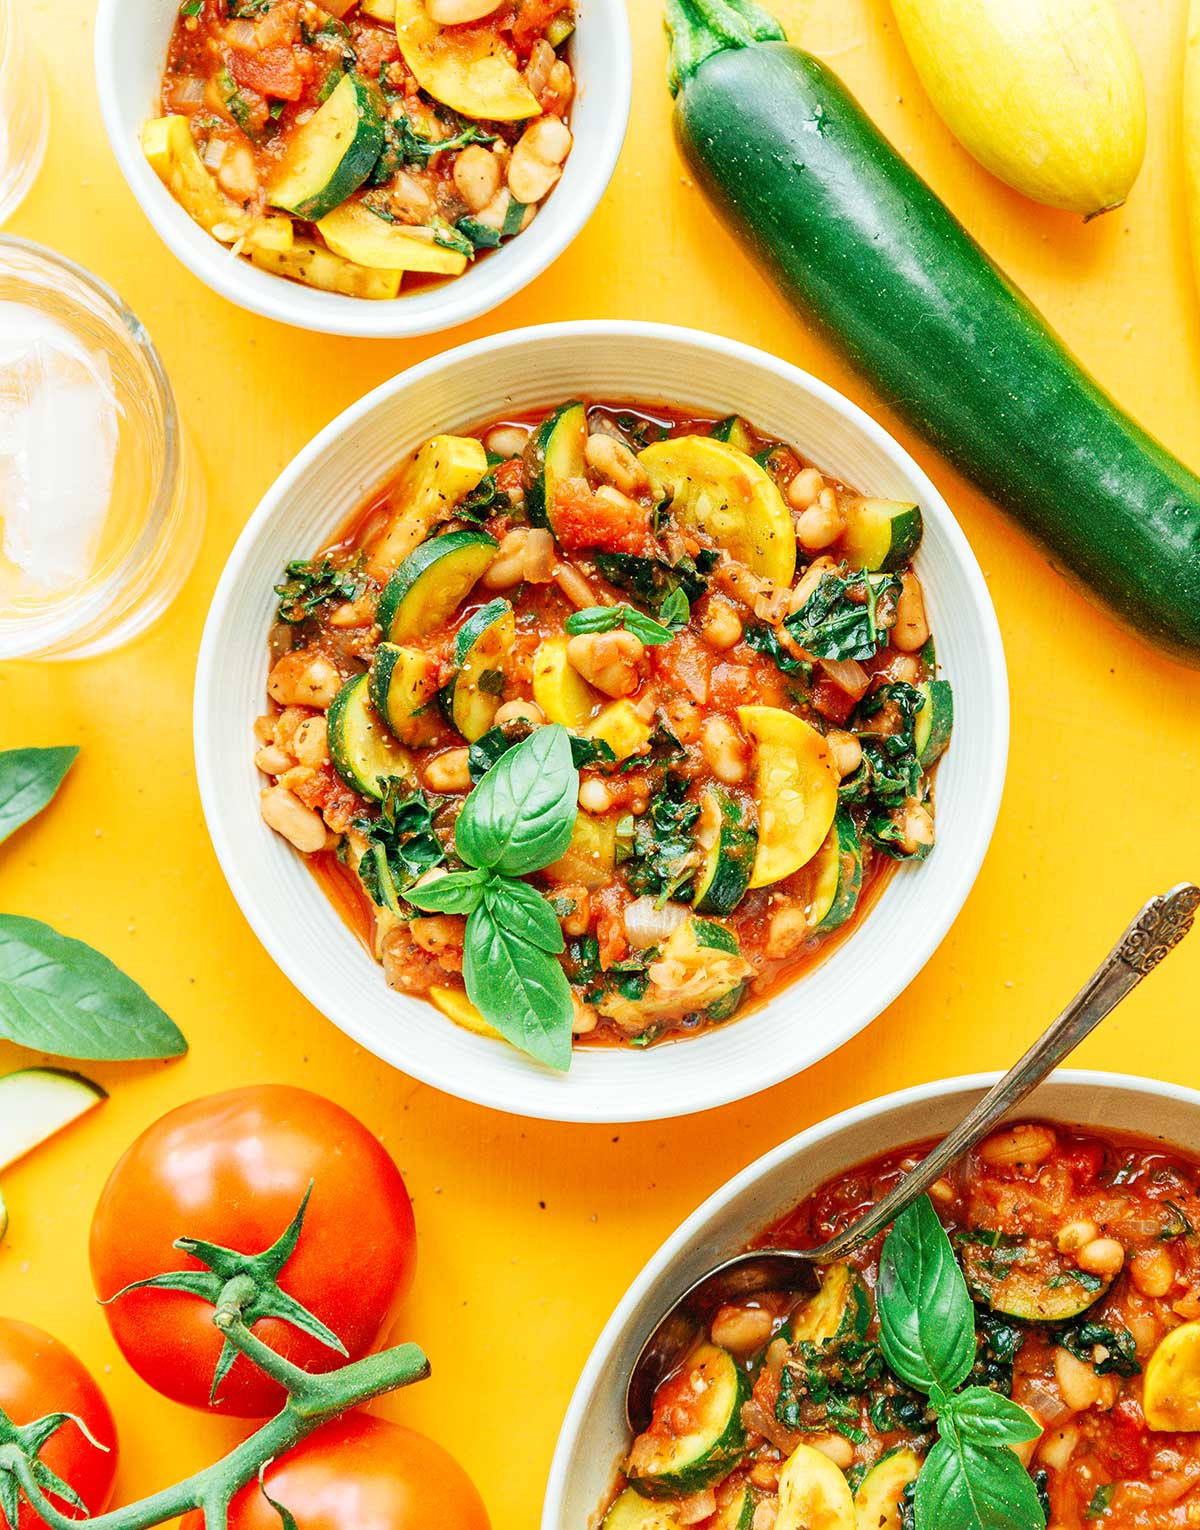 A while bowl filled with zucchini goulash and surrounded by ingredients like tomatoes, zucchini, and squash